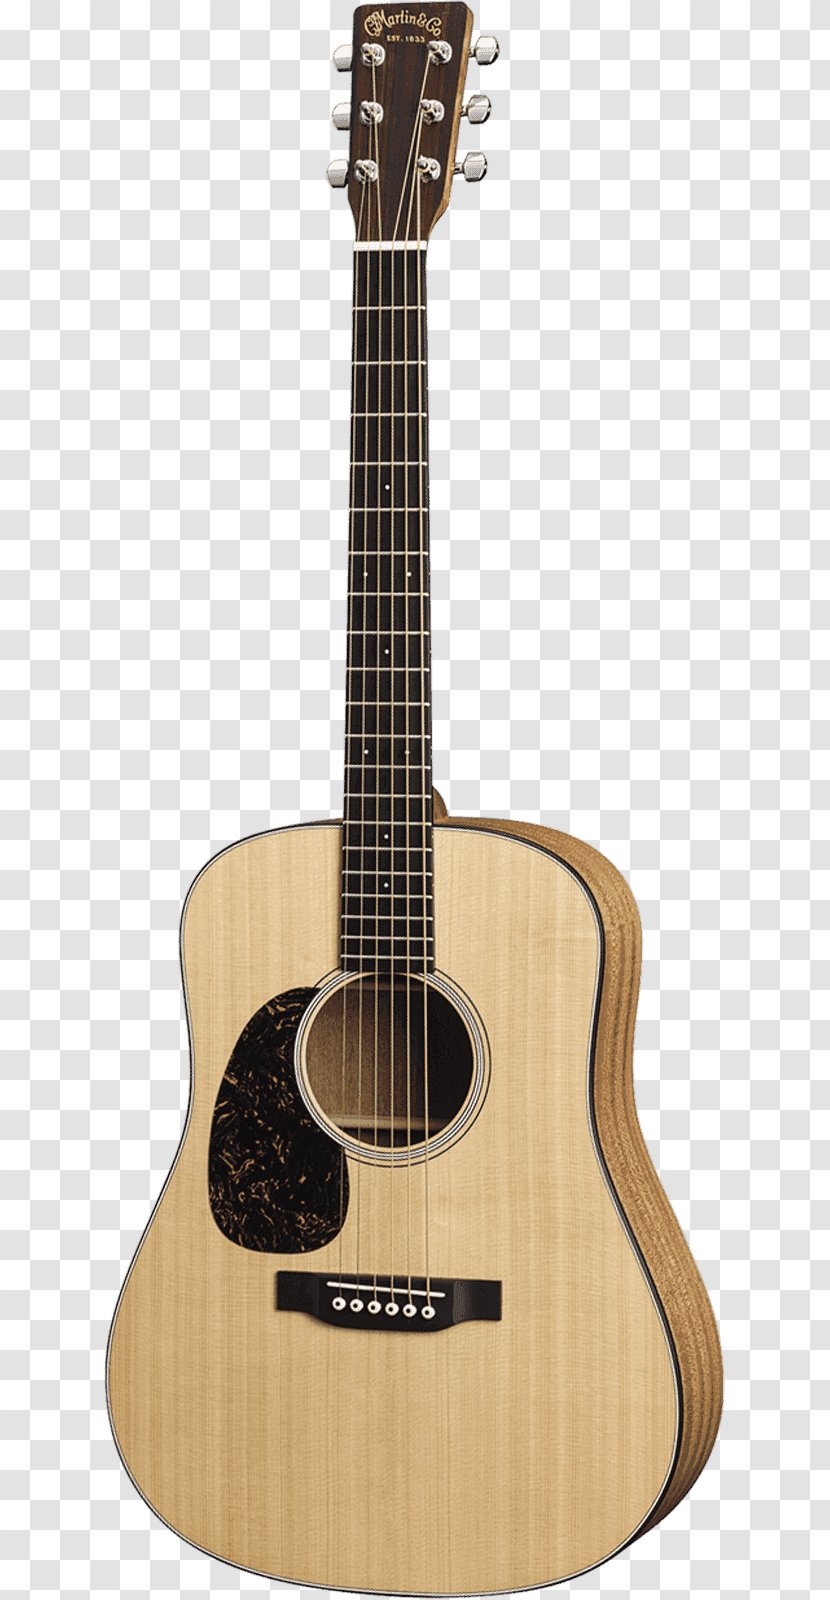 Acoustic-electric Guitar Dreadnought Musical Instruments - Silhouette Transparent PNG